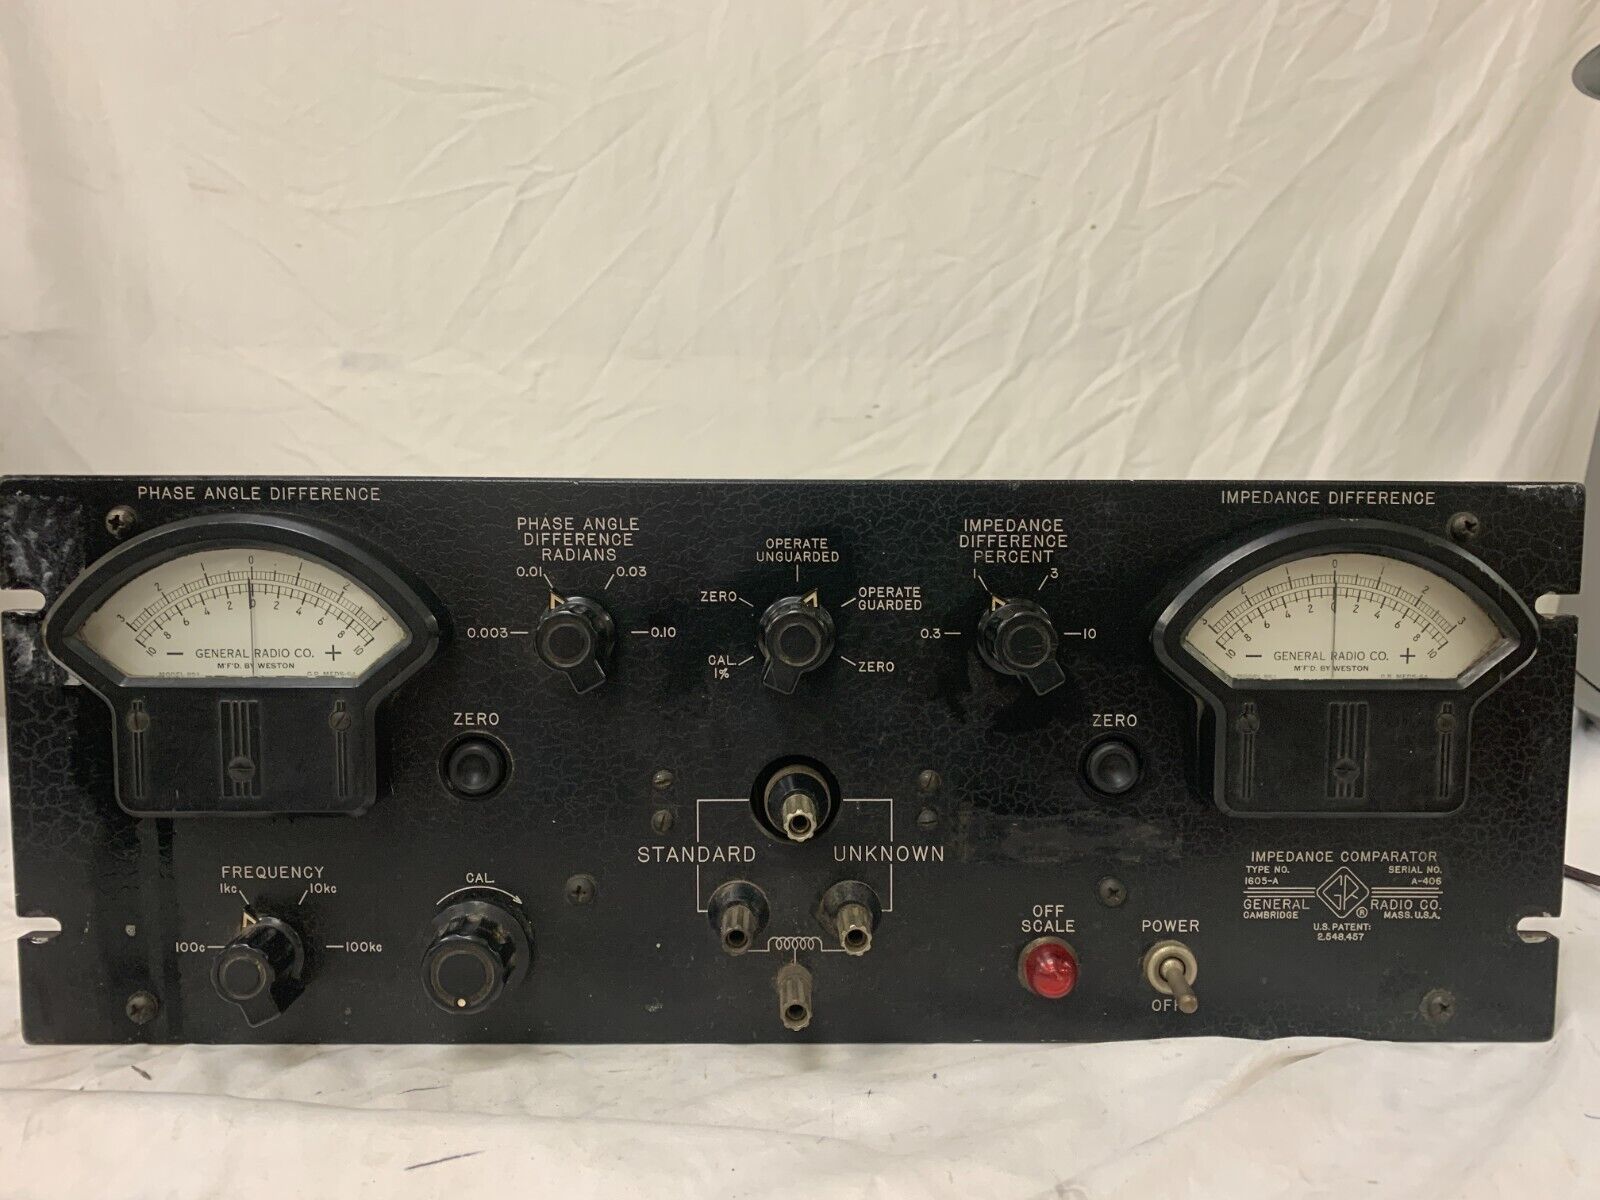 General Radio 1605-A Impedance Comparator